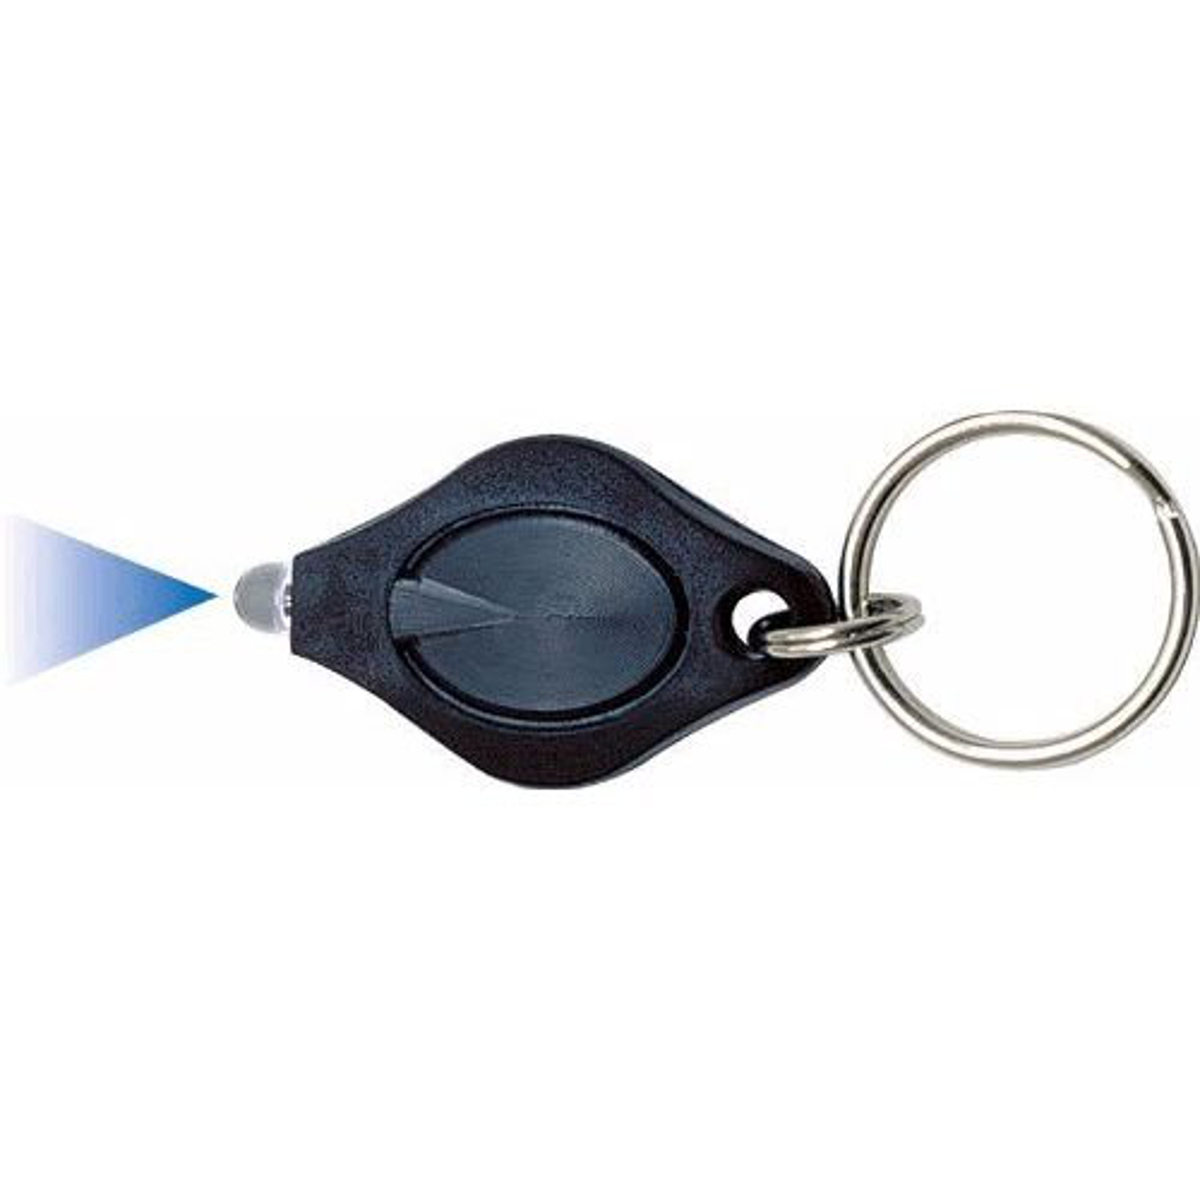 Blue Feauxton LED Light Key Rings All Products